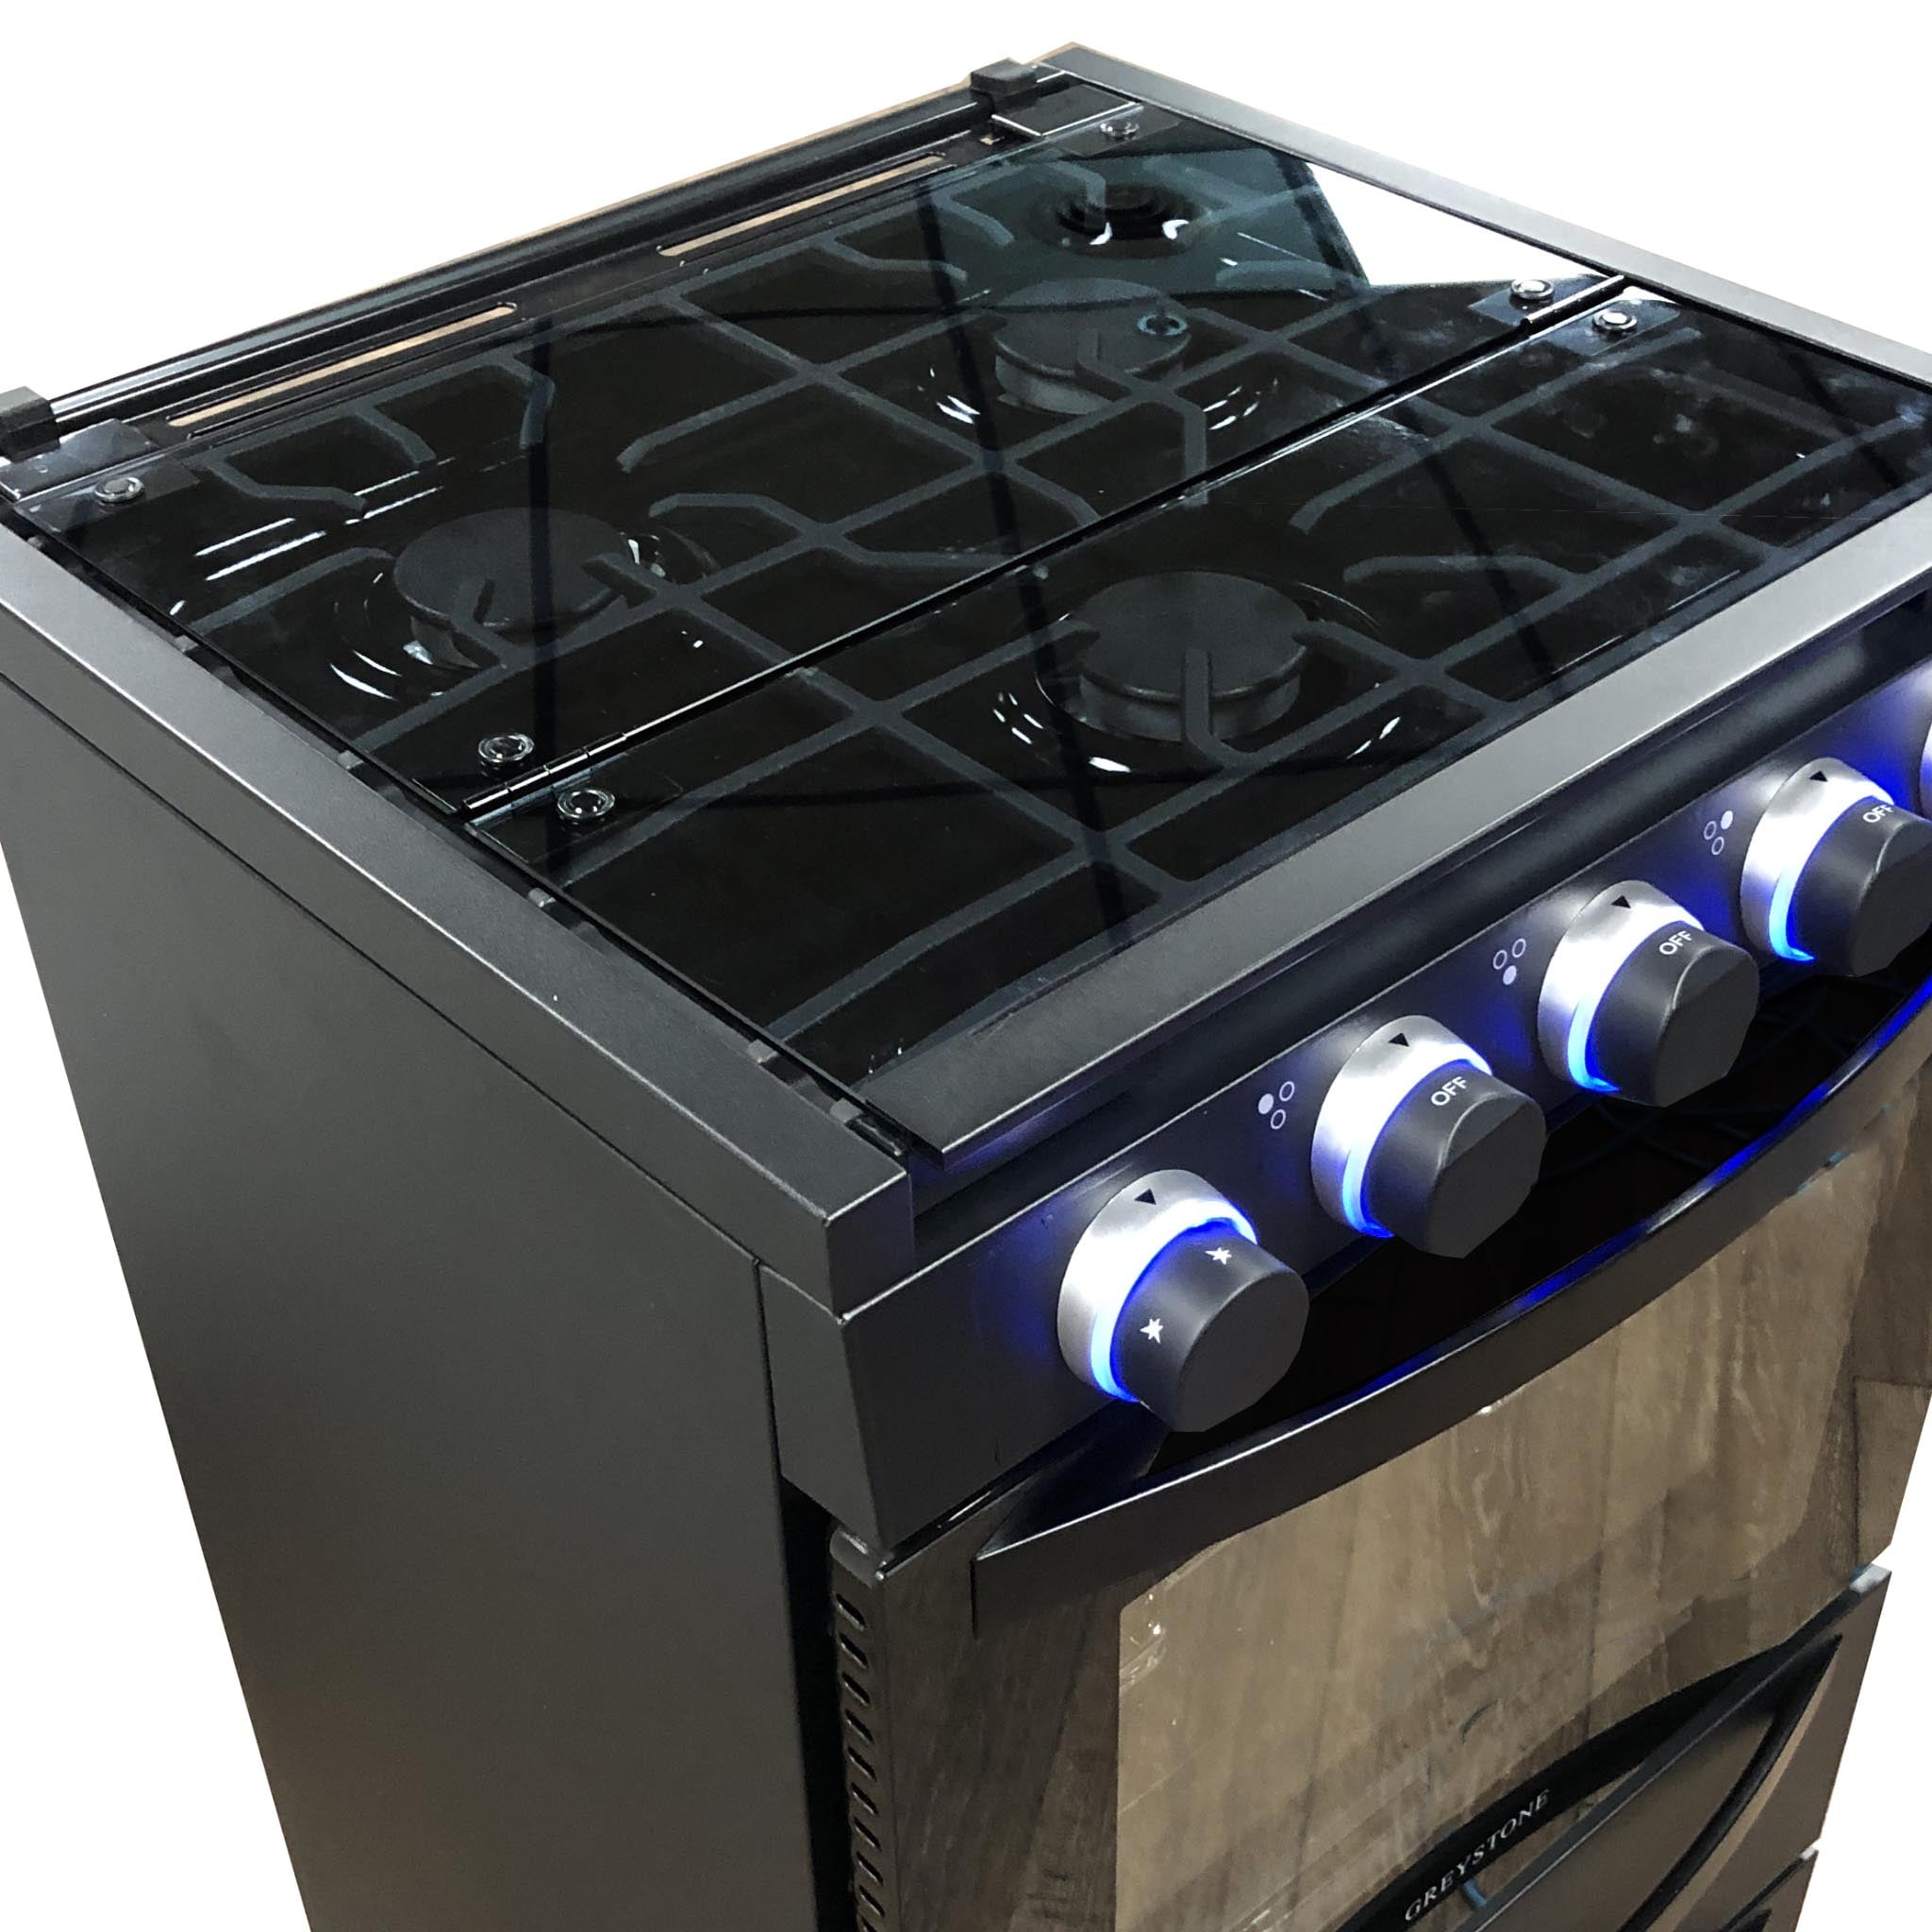 RecPro RV Stove GAS Range 21 Tall Optional Vented Range Hood Black or Silver Color options (Silver, No Vented Range Hood)